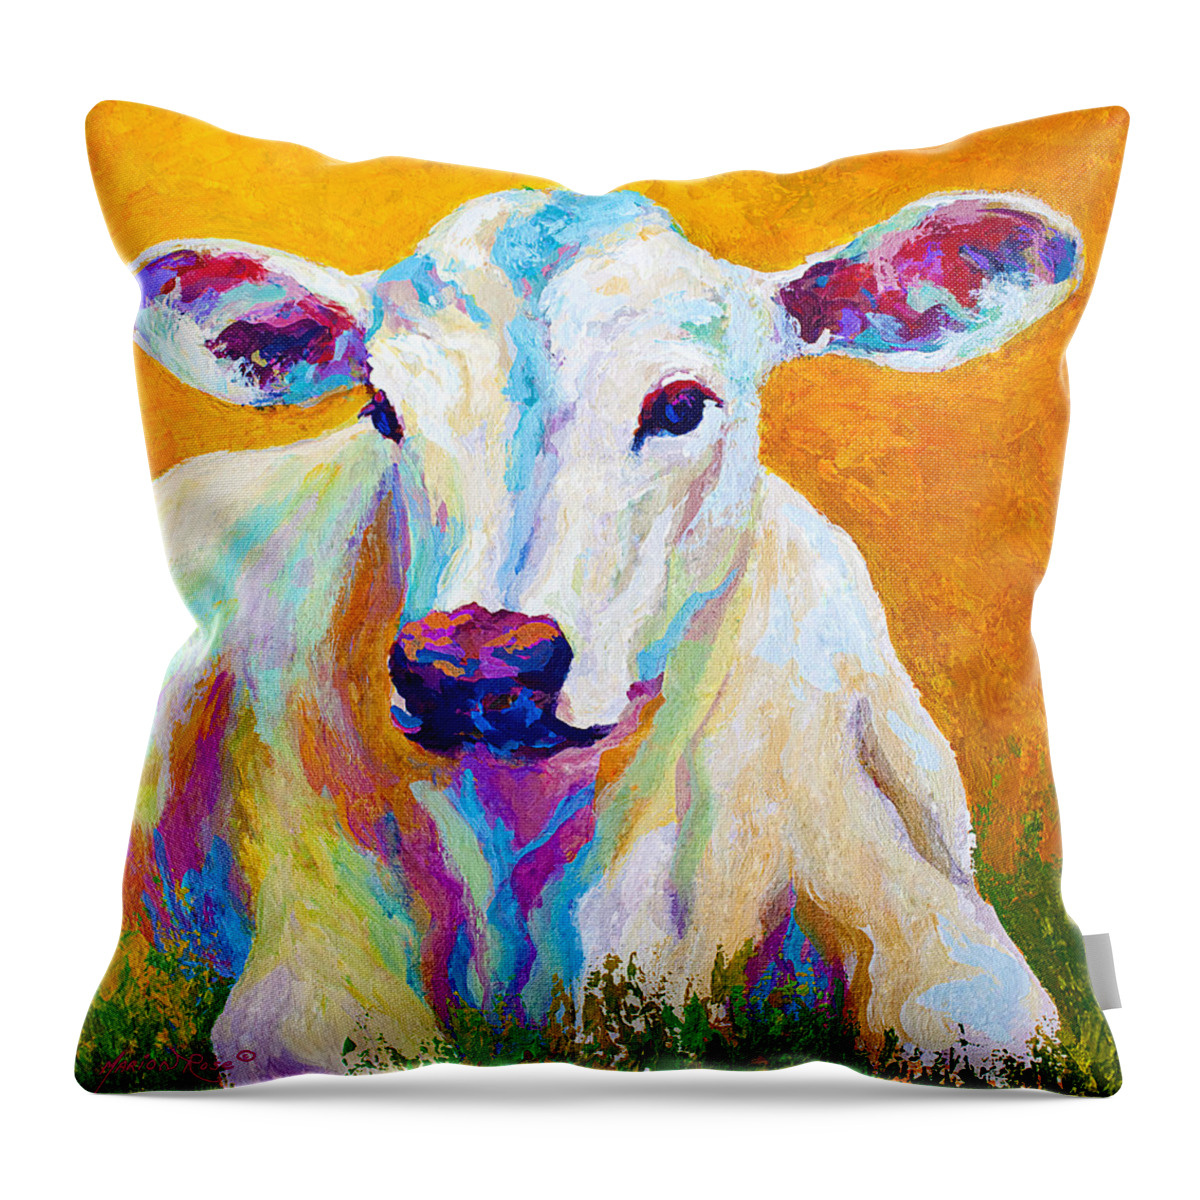 Cows Throw Pillow featuring the painting Innocence by Marion Rose